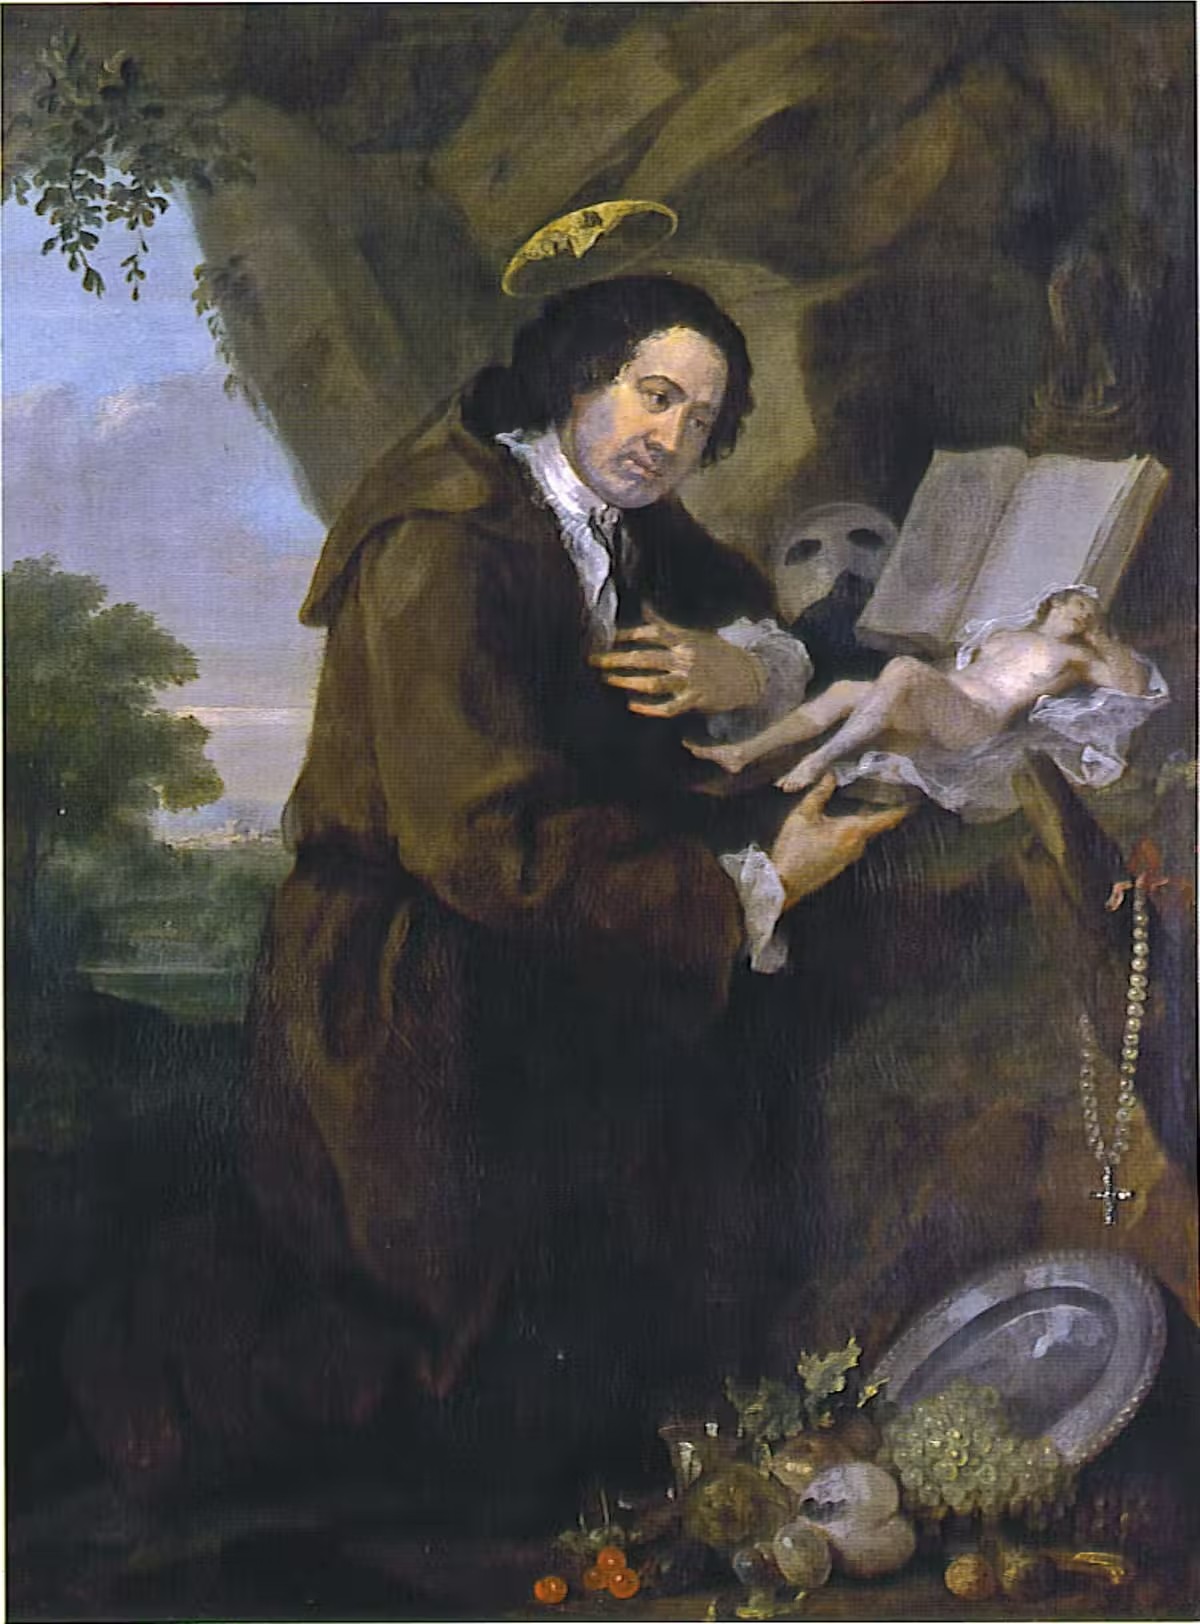 An oil painting of a man under a tree